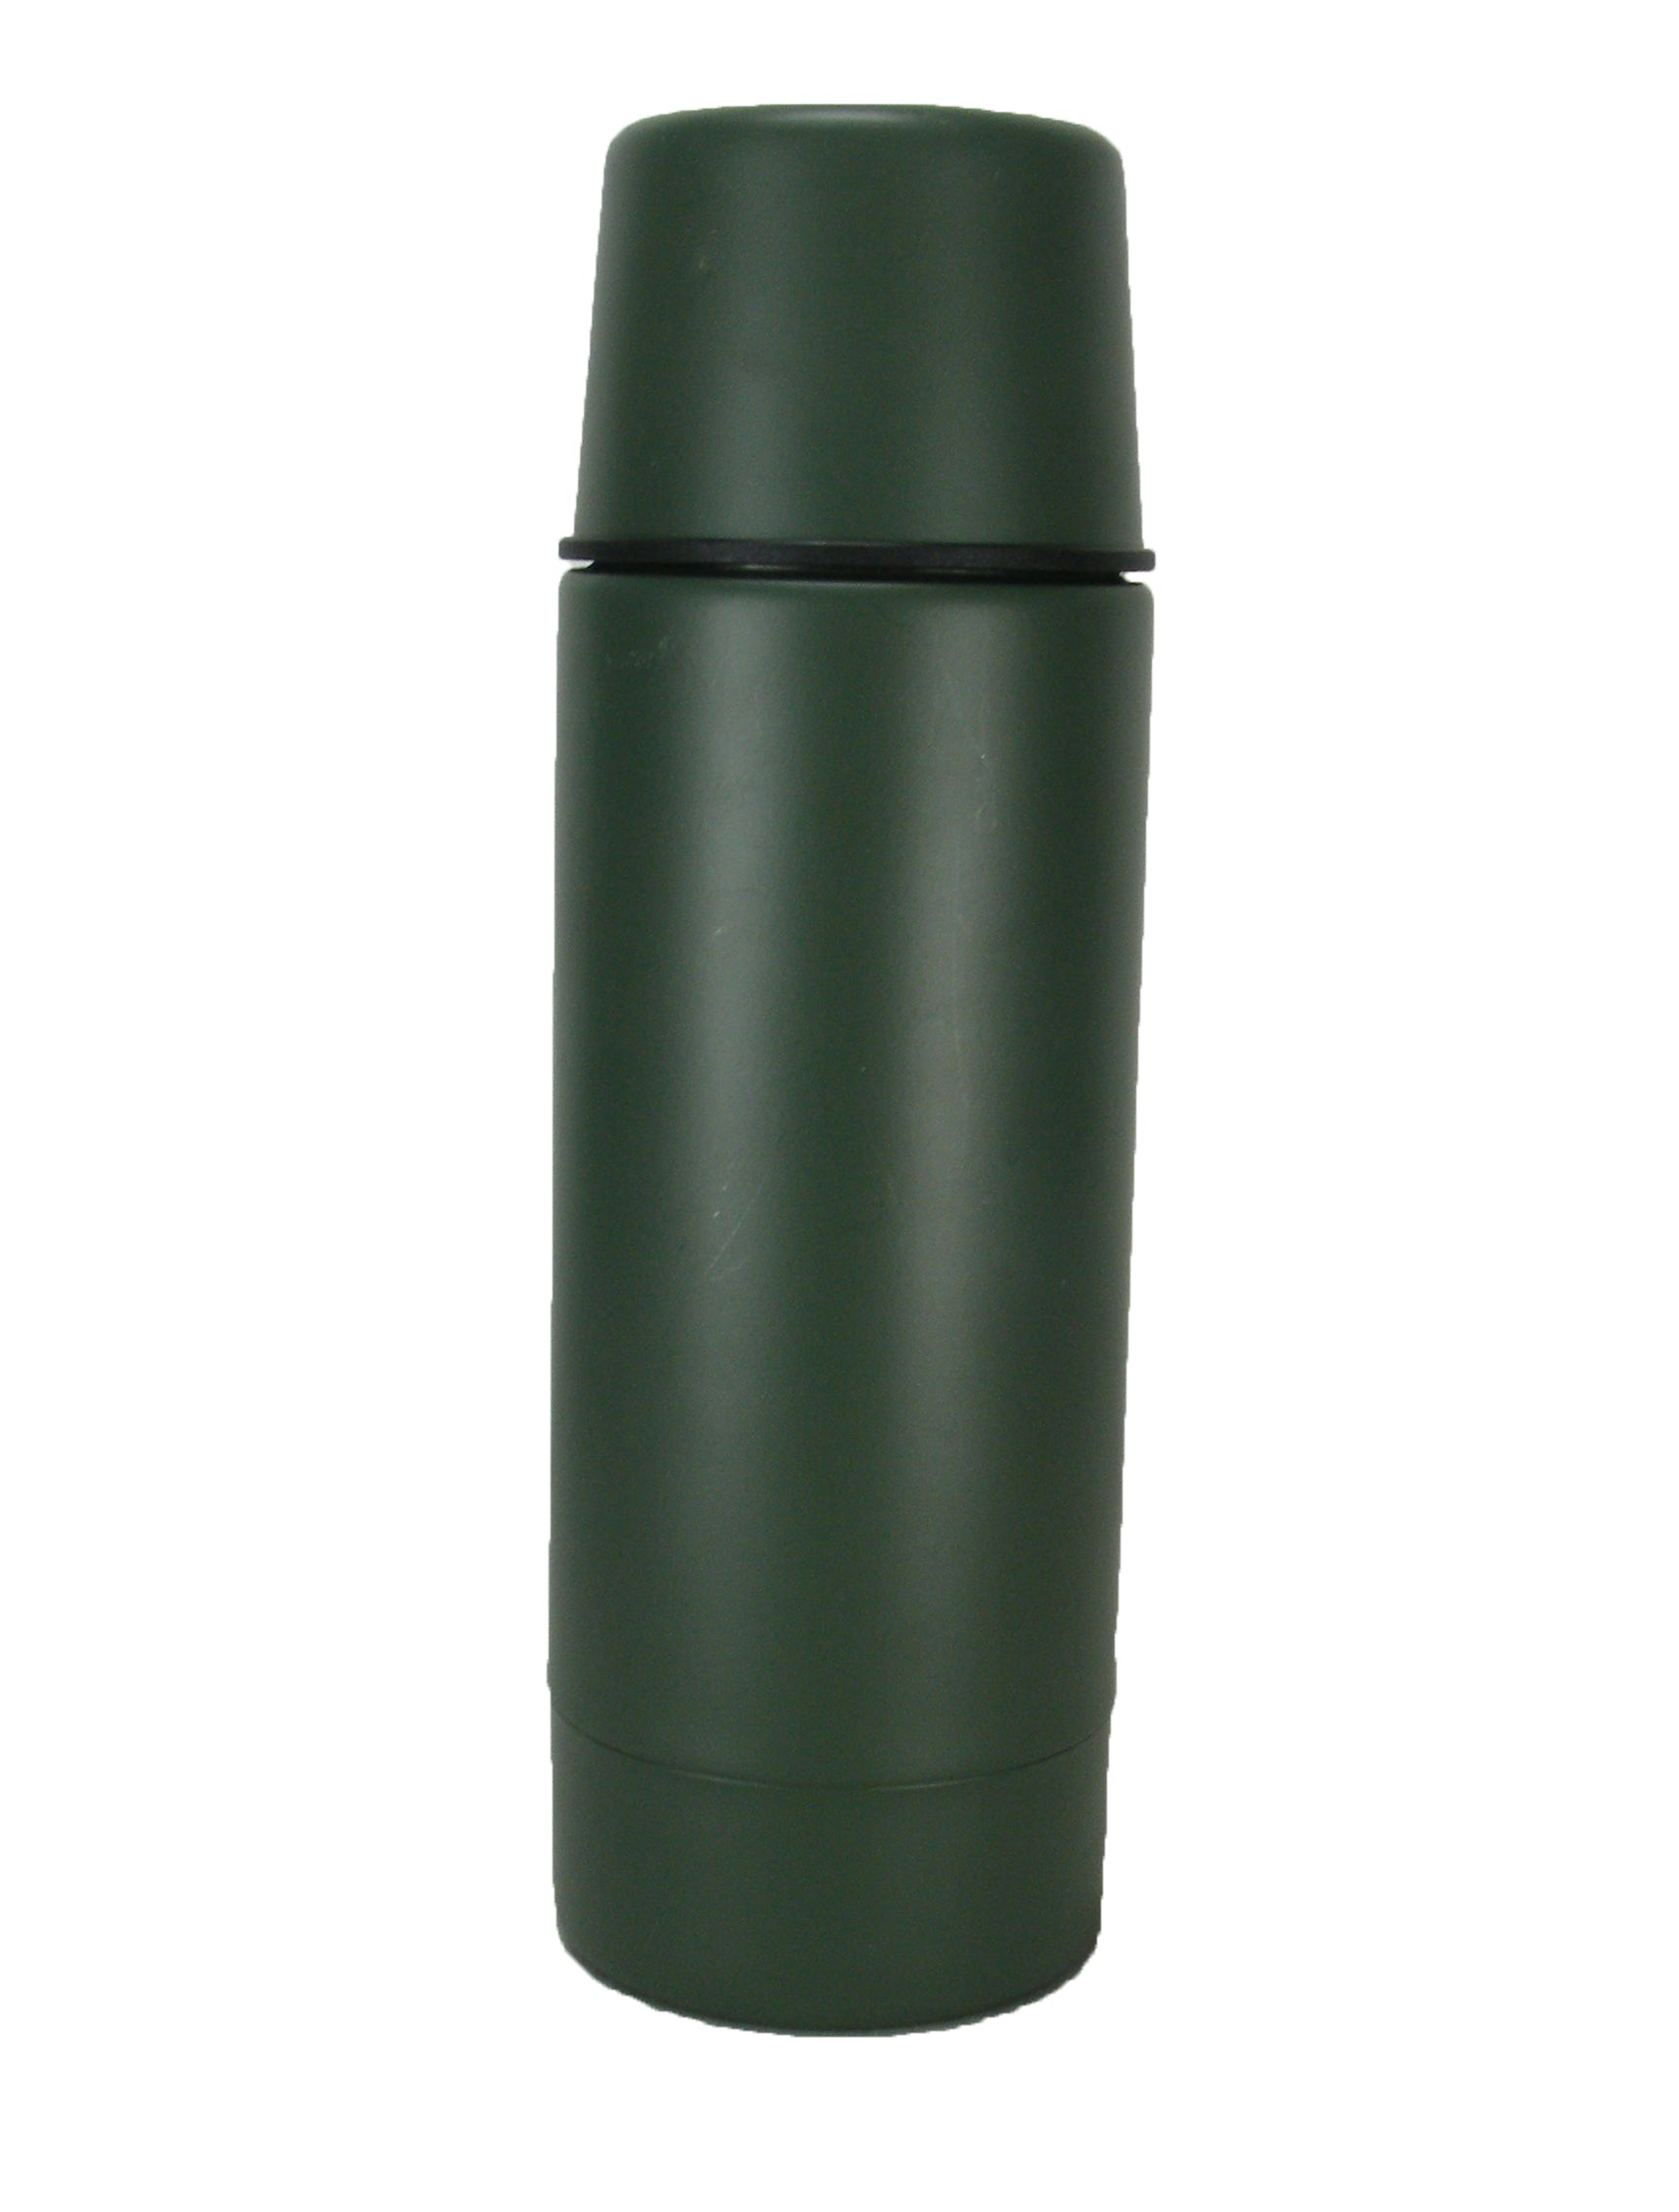 Dutch Army Thermos Flask - Green Painted Stainless Steel - Grade 1